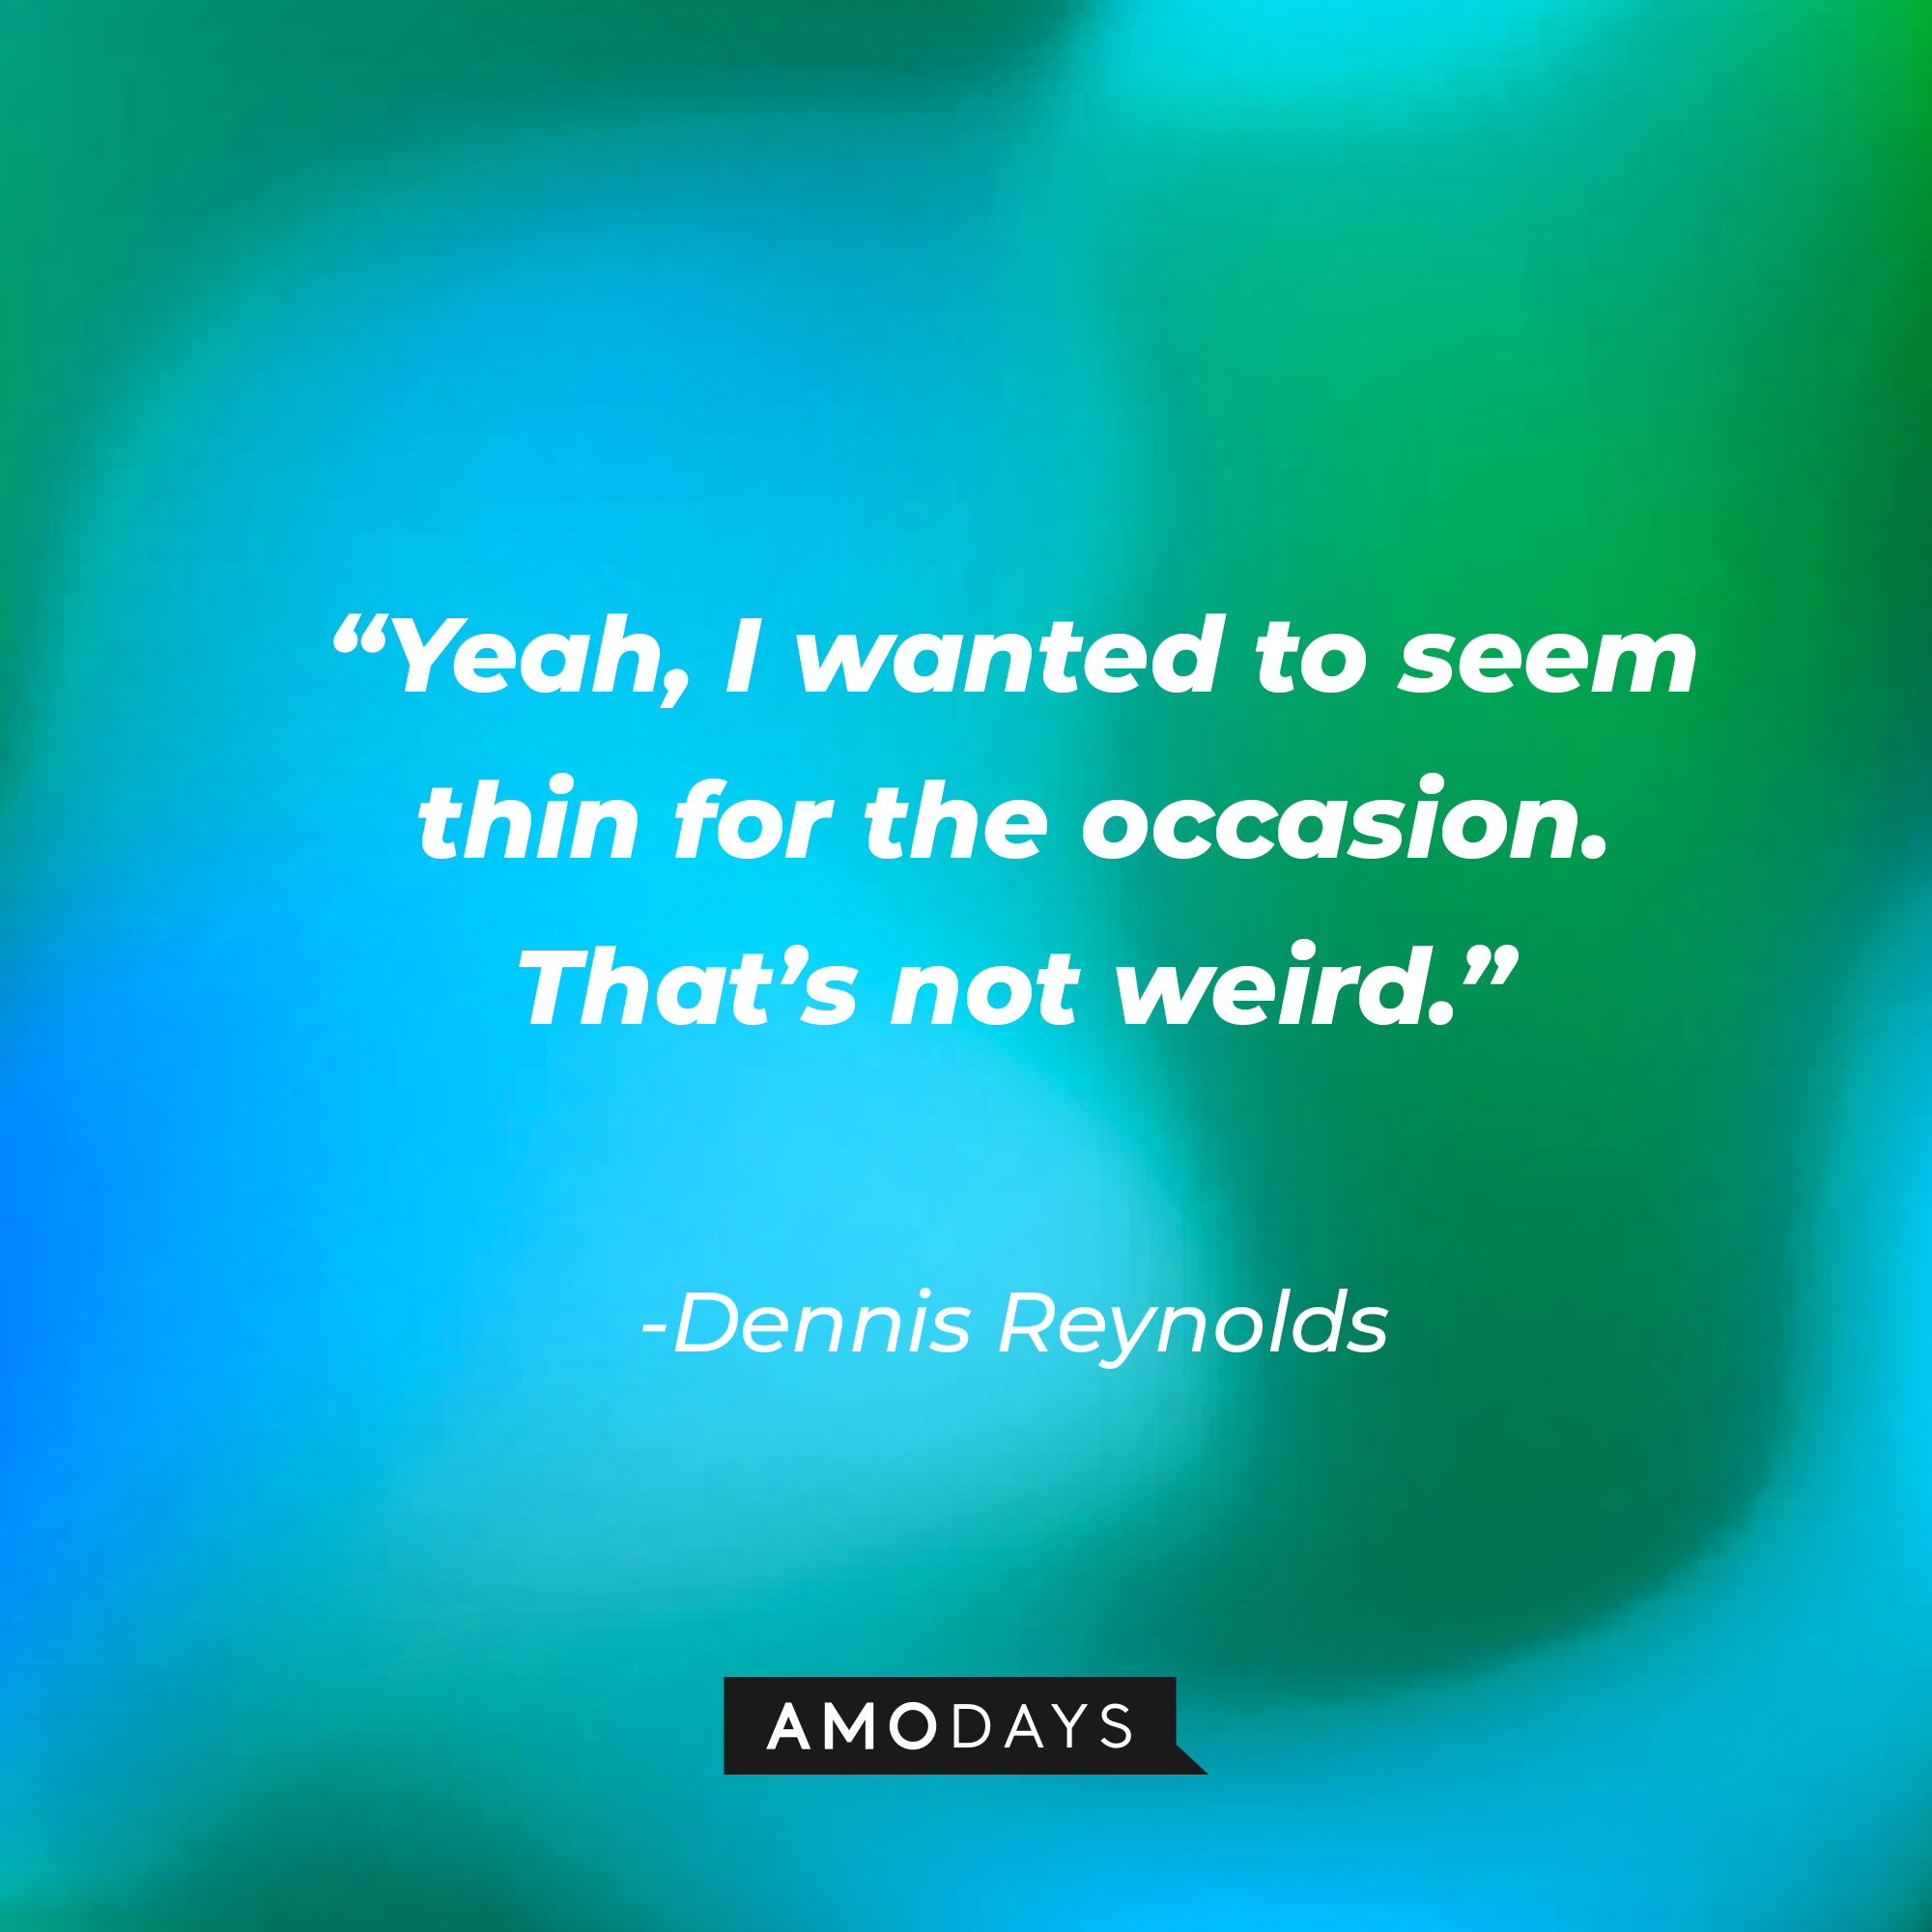 Dennis Reynolds’ quote:  “Yeah, I wanted to seem thin for the occasion. That’s not weird.” | Source: AmoDays